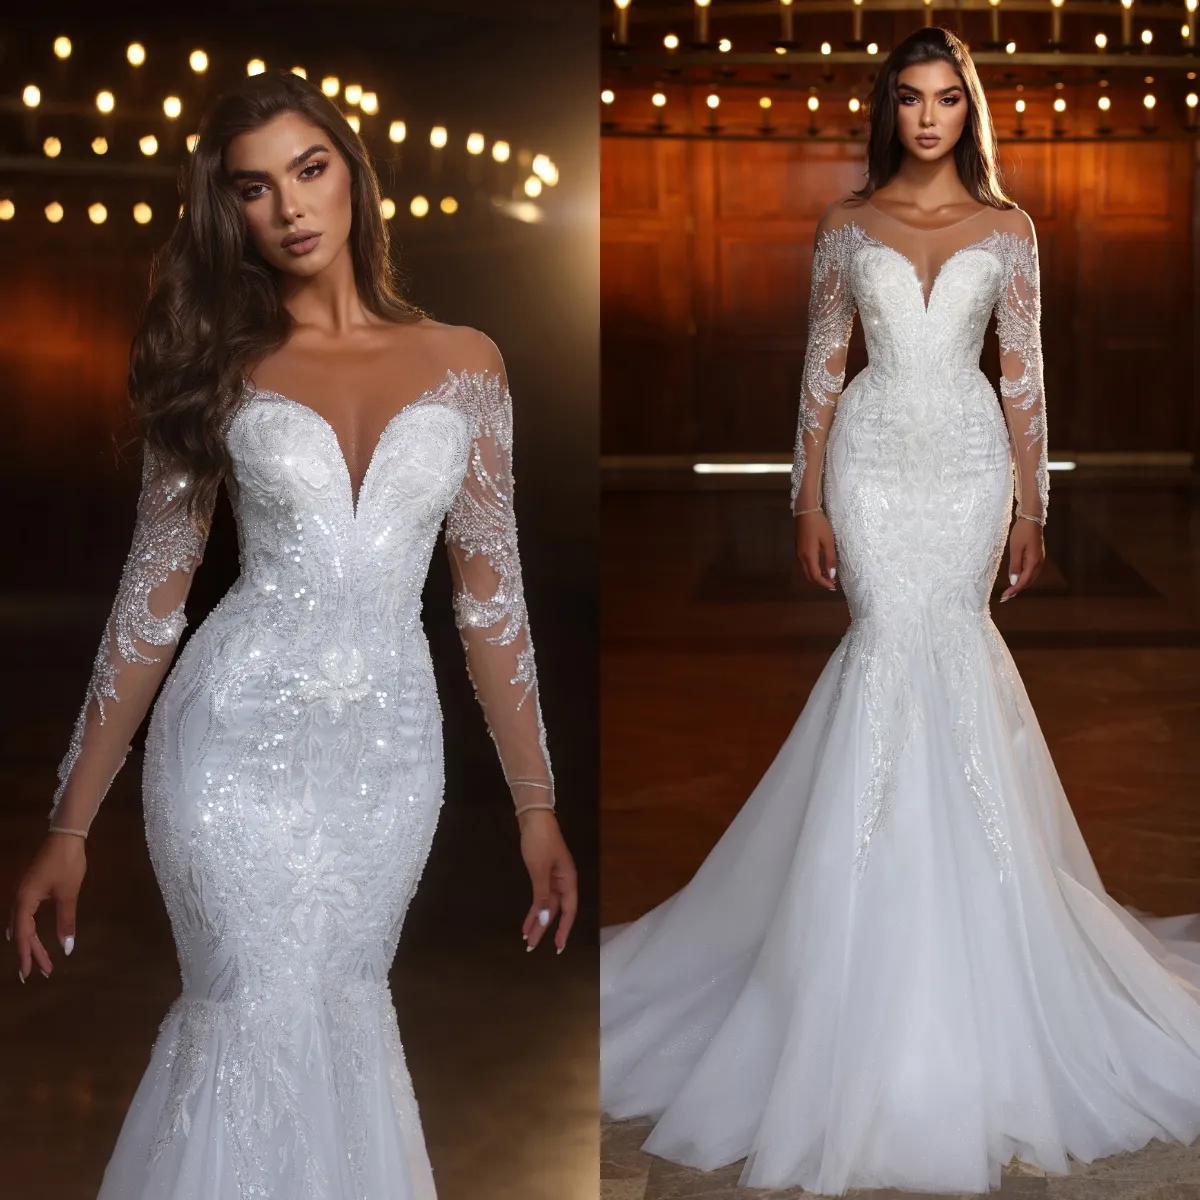 Gorgeous White Mermaid Wedding Dresses Long Sleeve Lace Appliqued Crystal Sequined Bridal Gowns Sweep Train robes de mariee